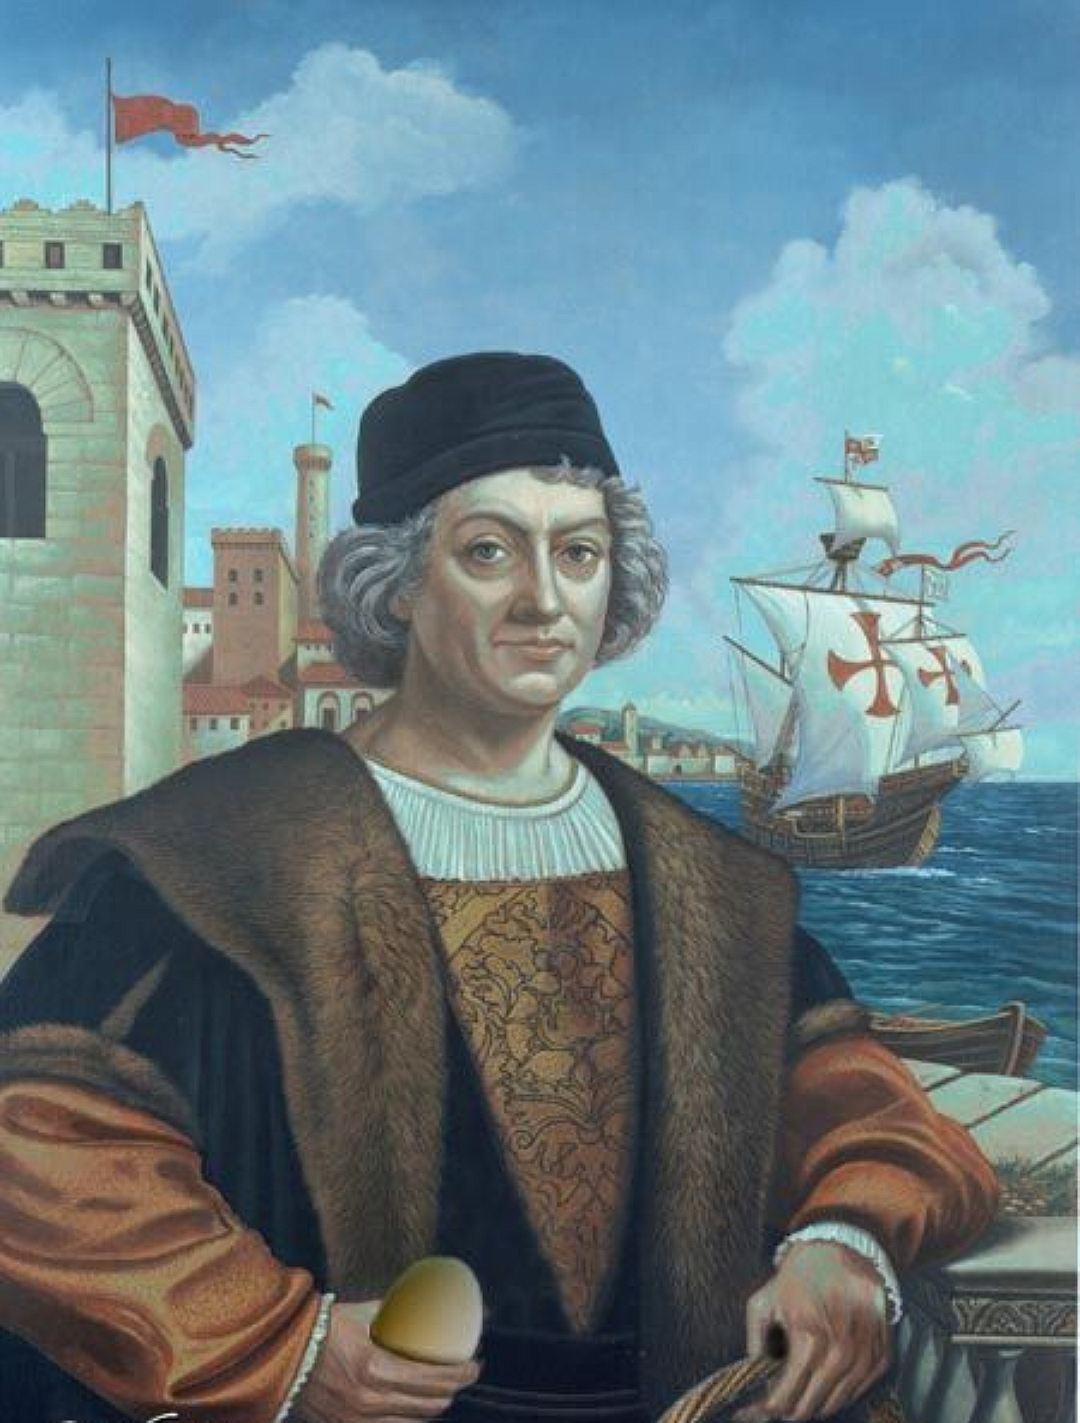 a biography of christopher columbus